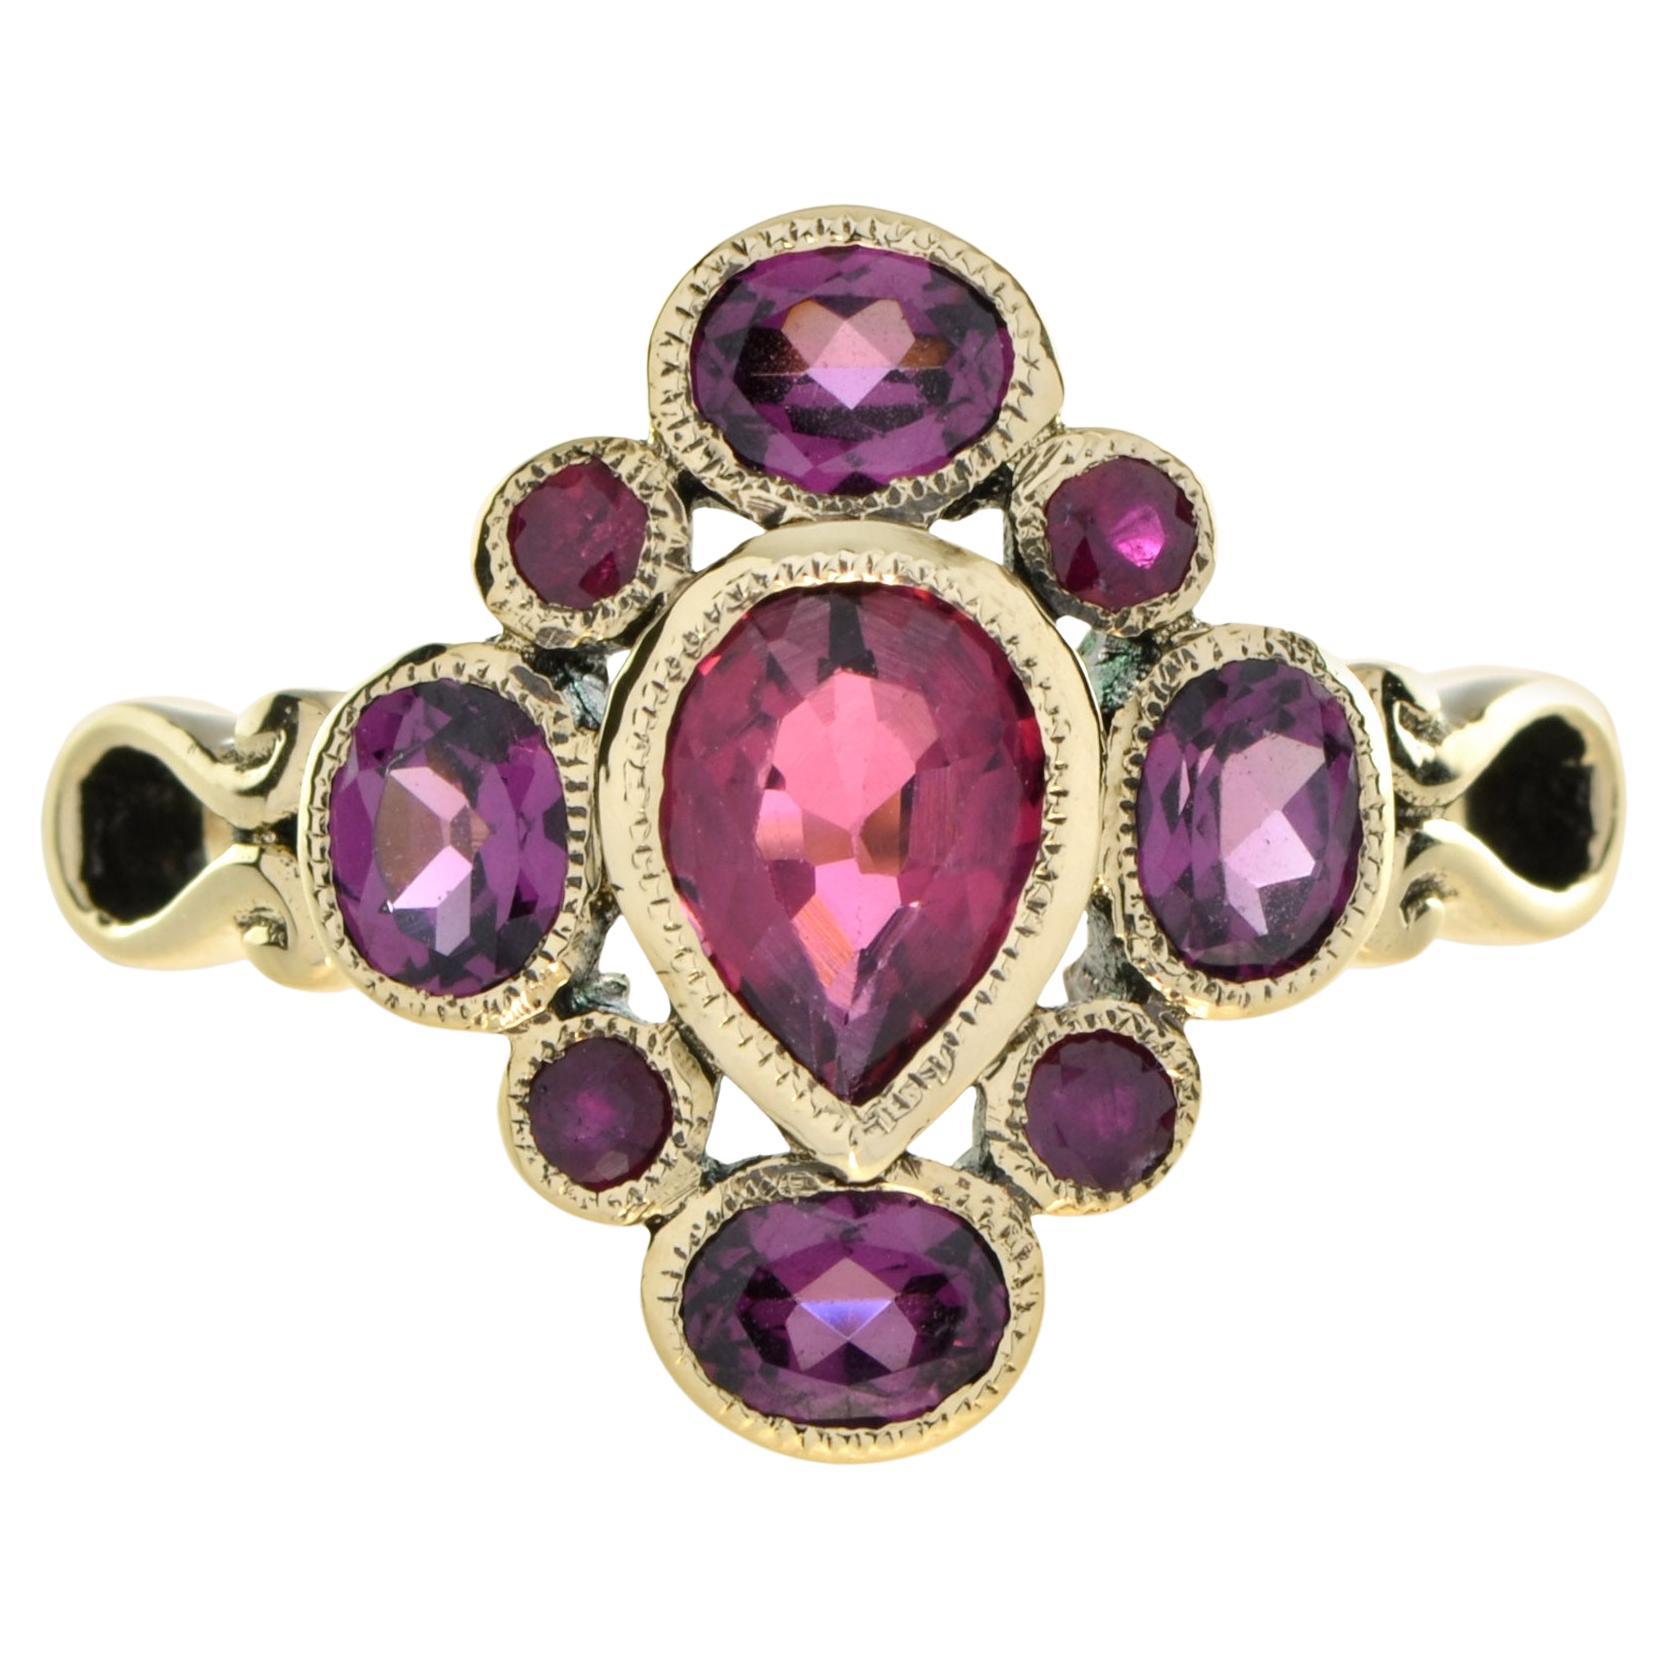 Vintage Style Pink Tourmaline with Ruby and Rhodolite Cluster Ring in 9K Gold